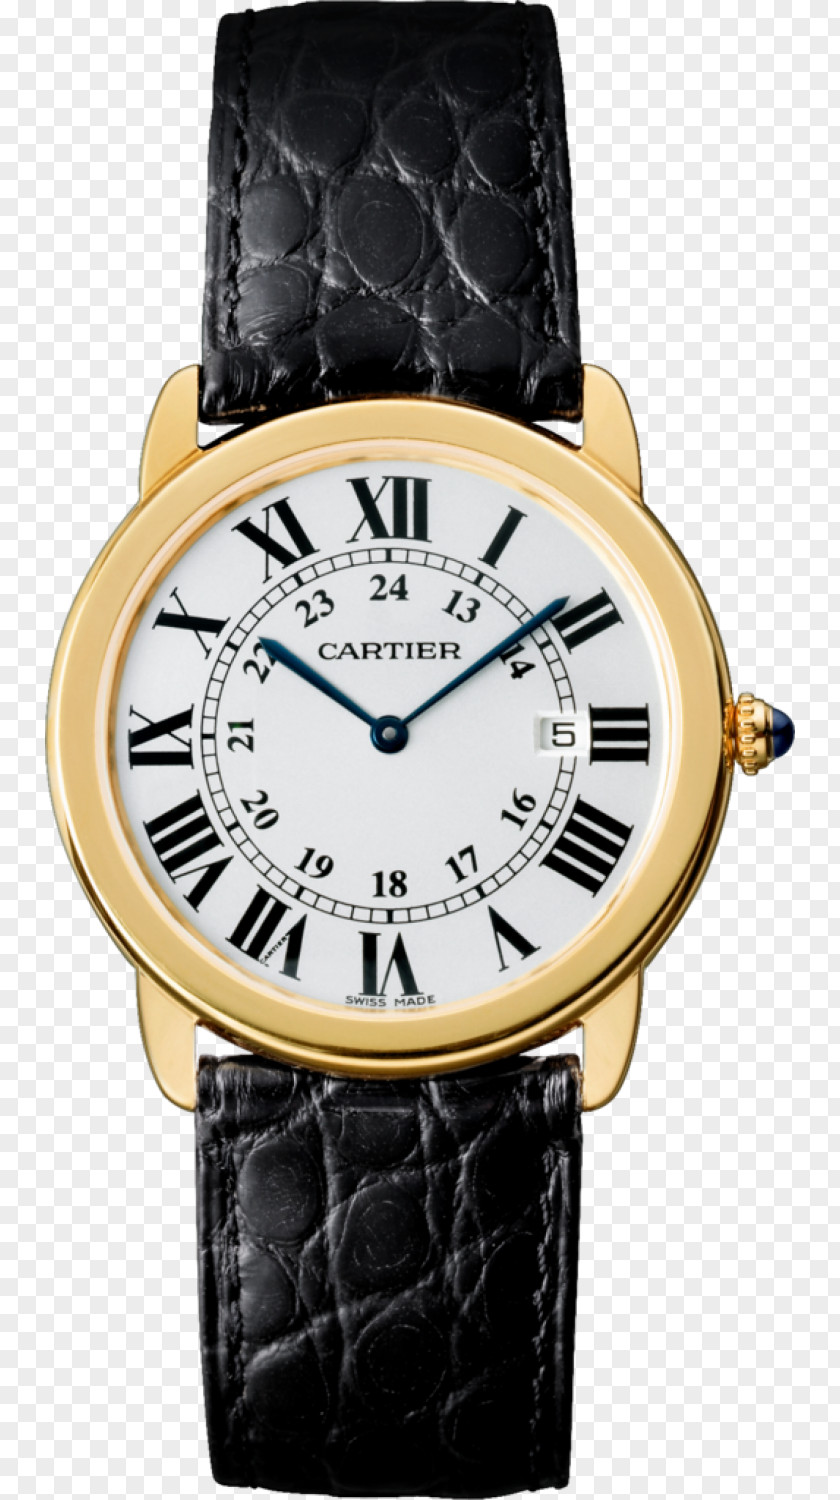 Watch Cartier Strap Cabochon PNG